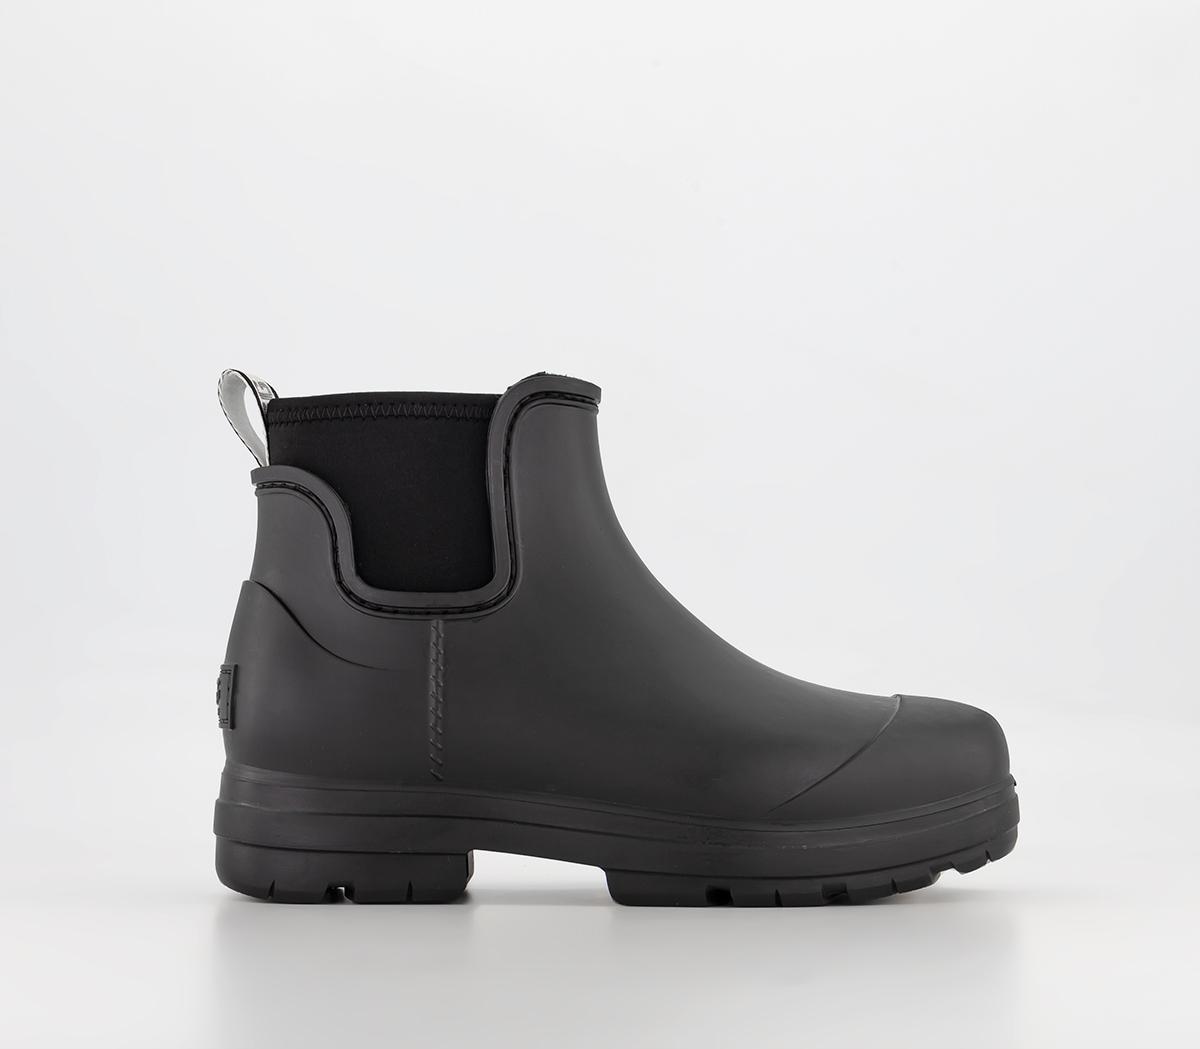 UGG Droplet Rain Boots Black - Women's Ankle Boots